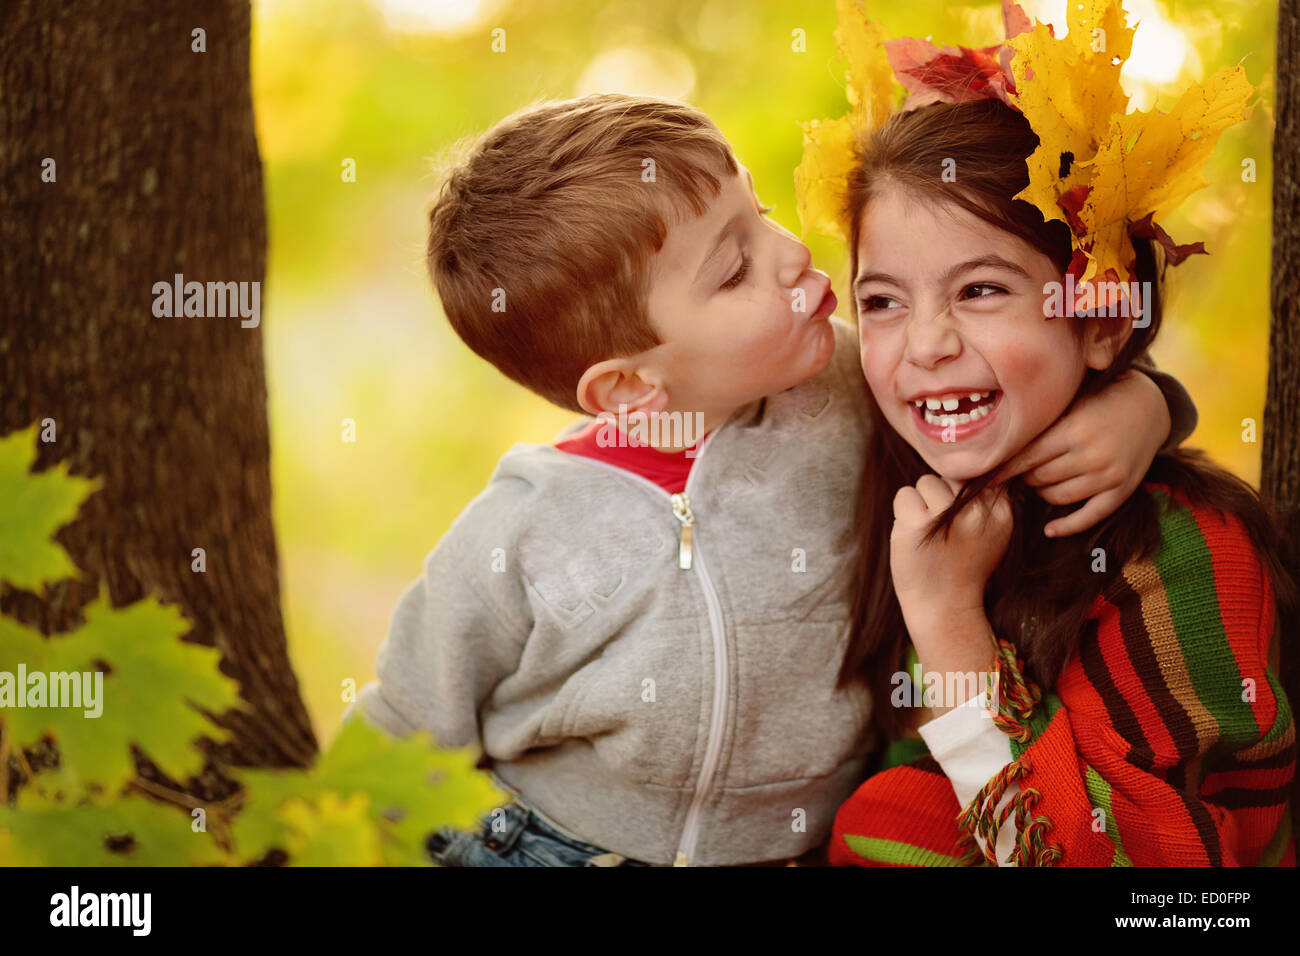 Boy trying to kiss a girl in the forest Stock Photo